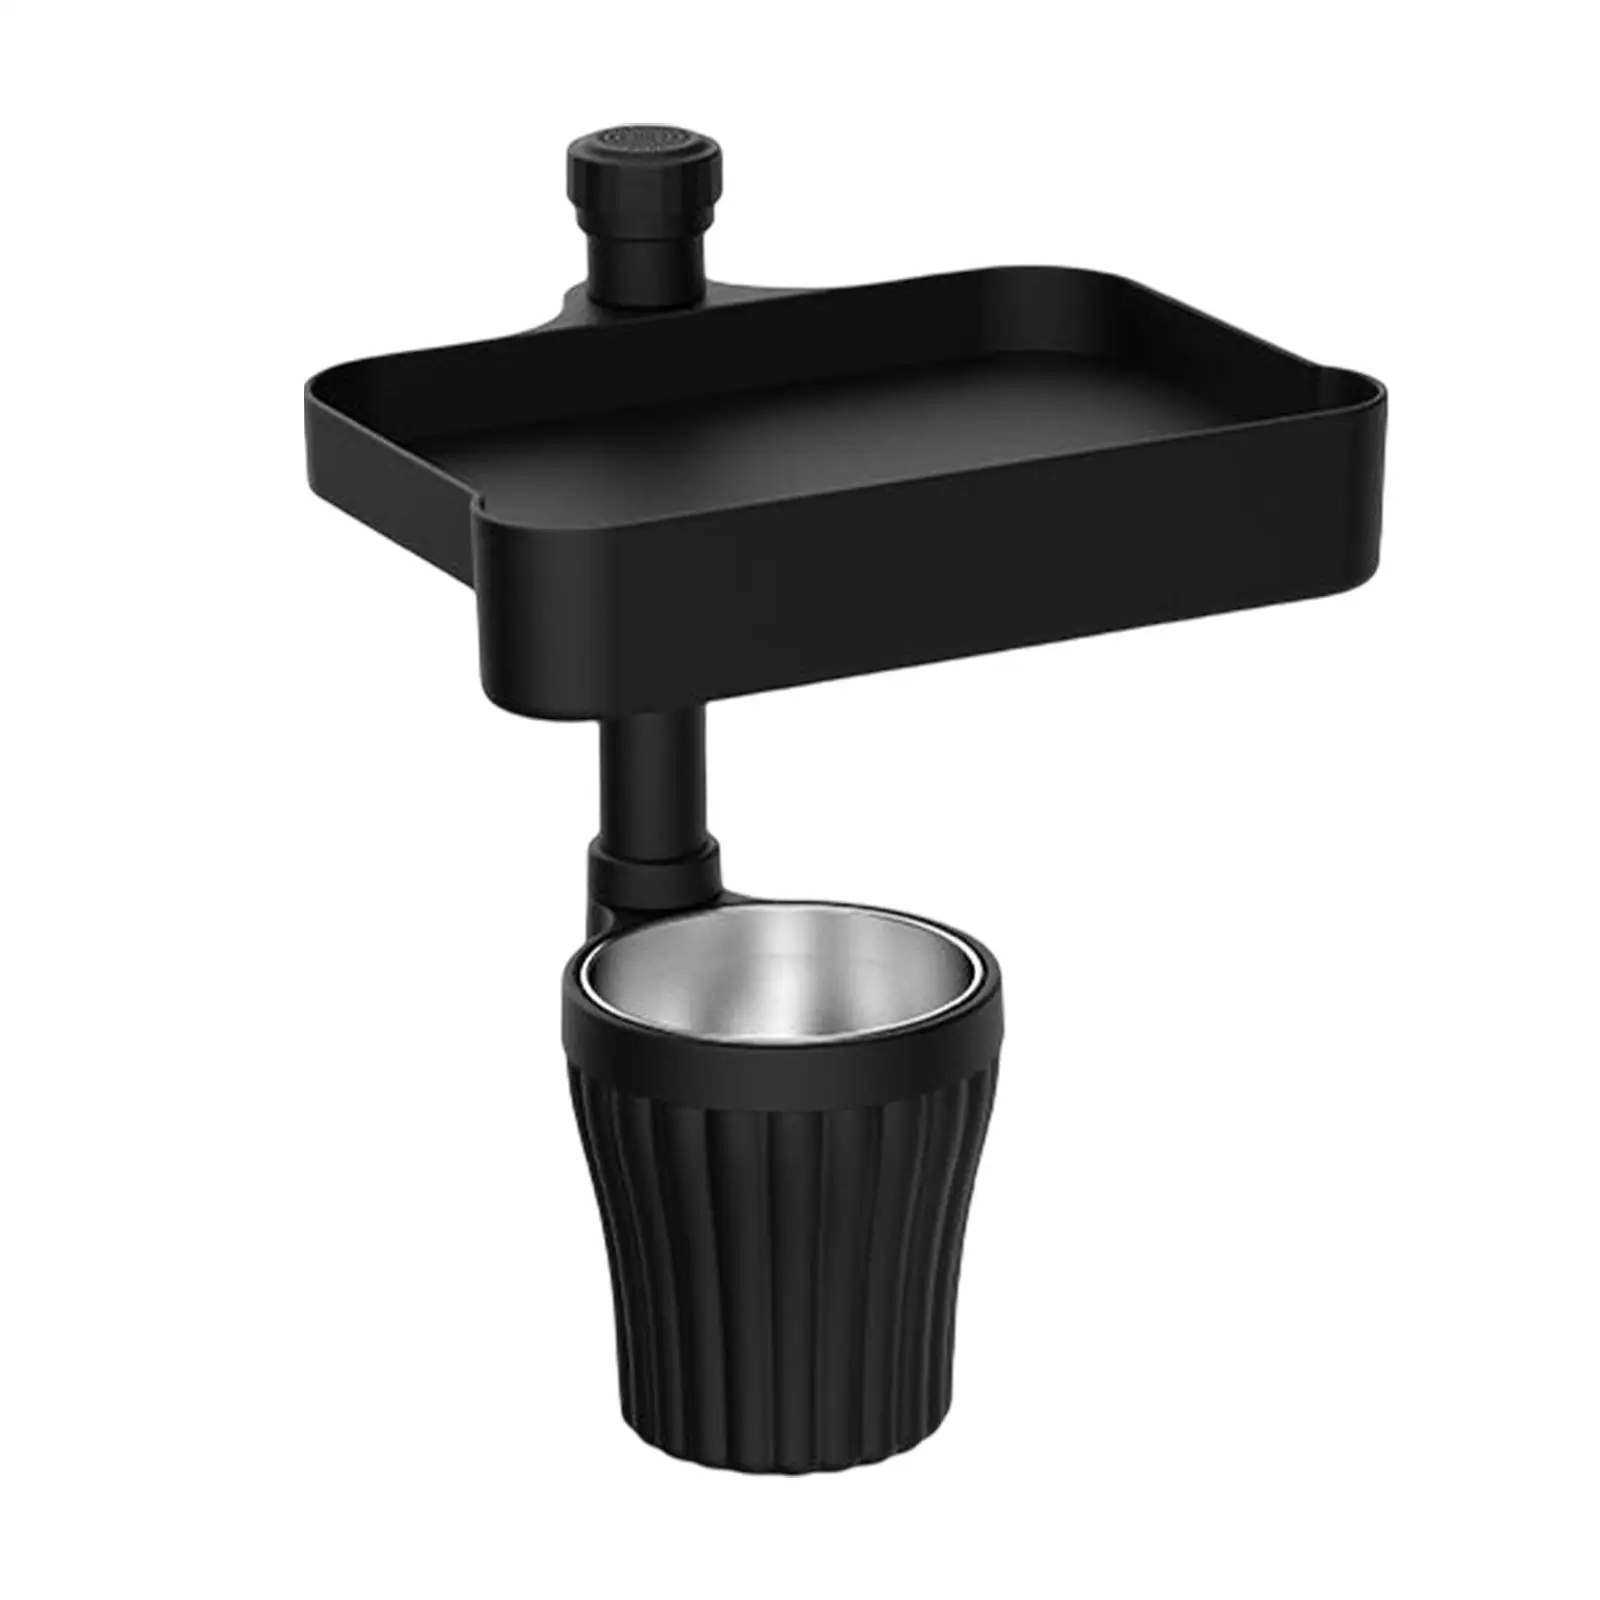 Cup Holder 360° Rotating Base Beverage Can Attachment Vehicle Holder Car Headrest Seat Back Organizer Cup Holder for Car